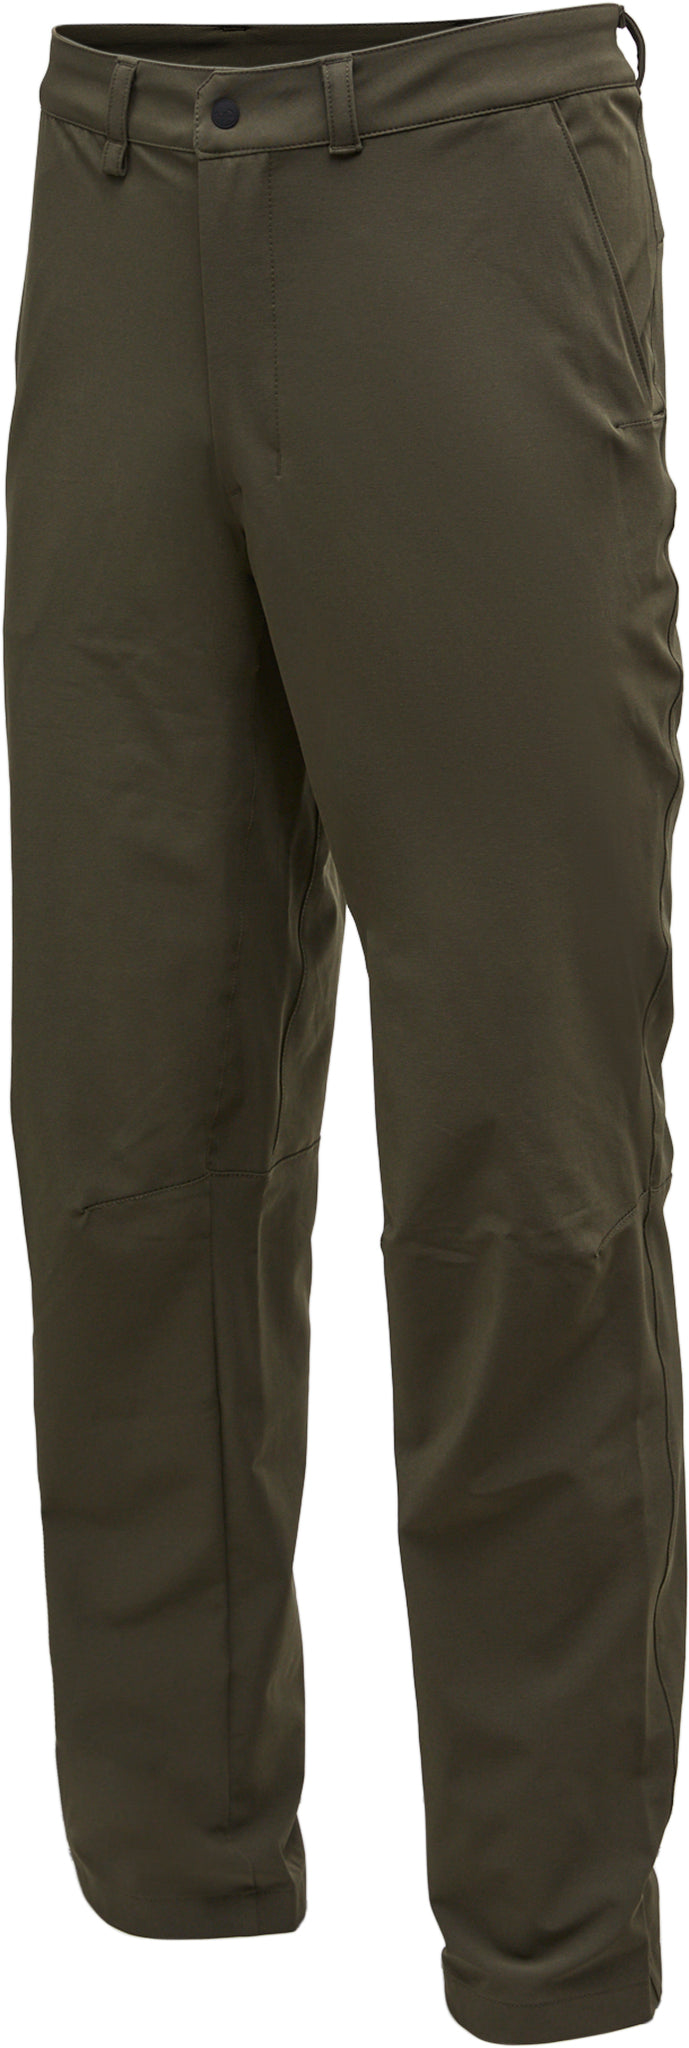 The North Face Paramount Pant - Men's